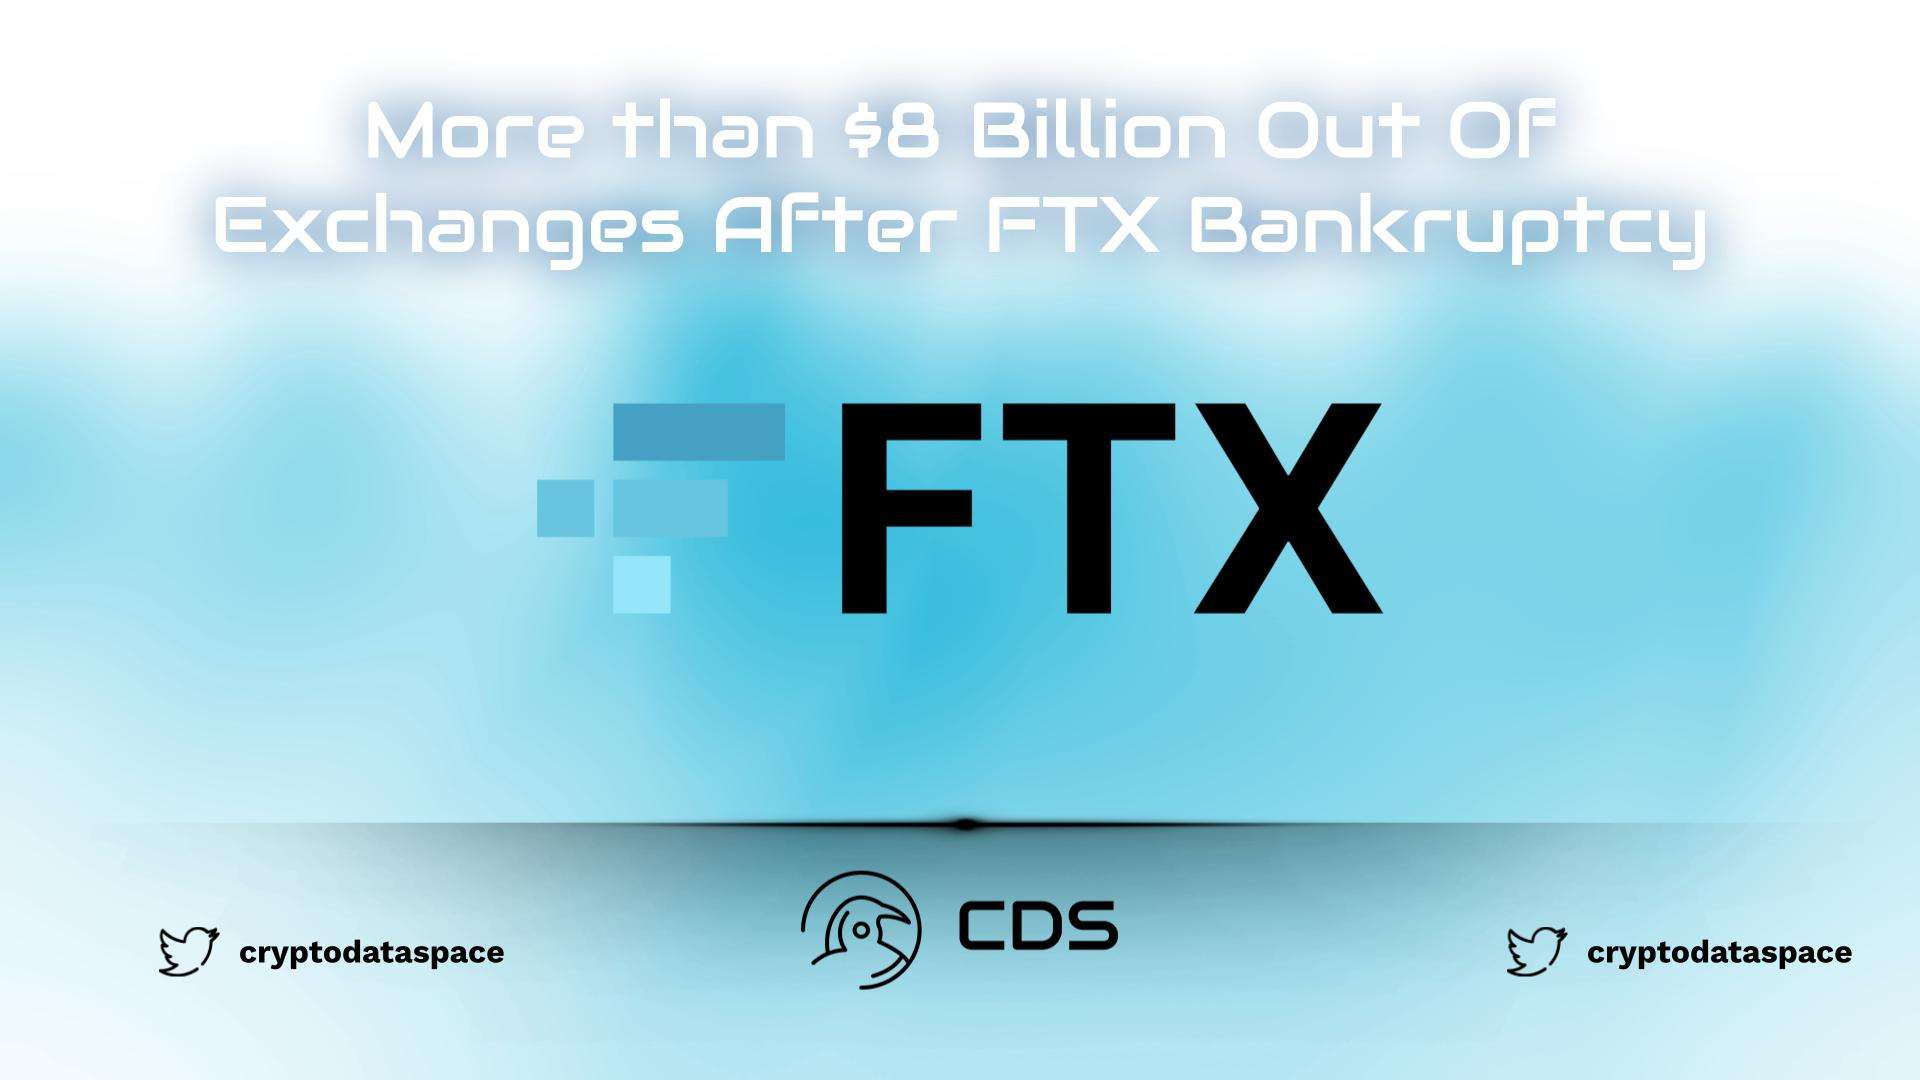 More than $8 Billion Out Of Exchanges After FTX Bankruptcy